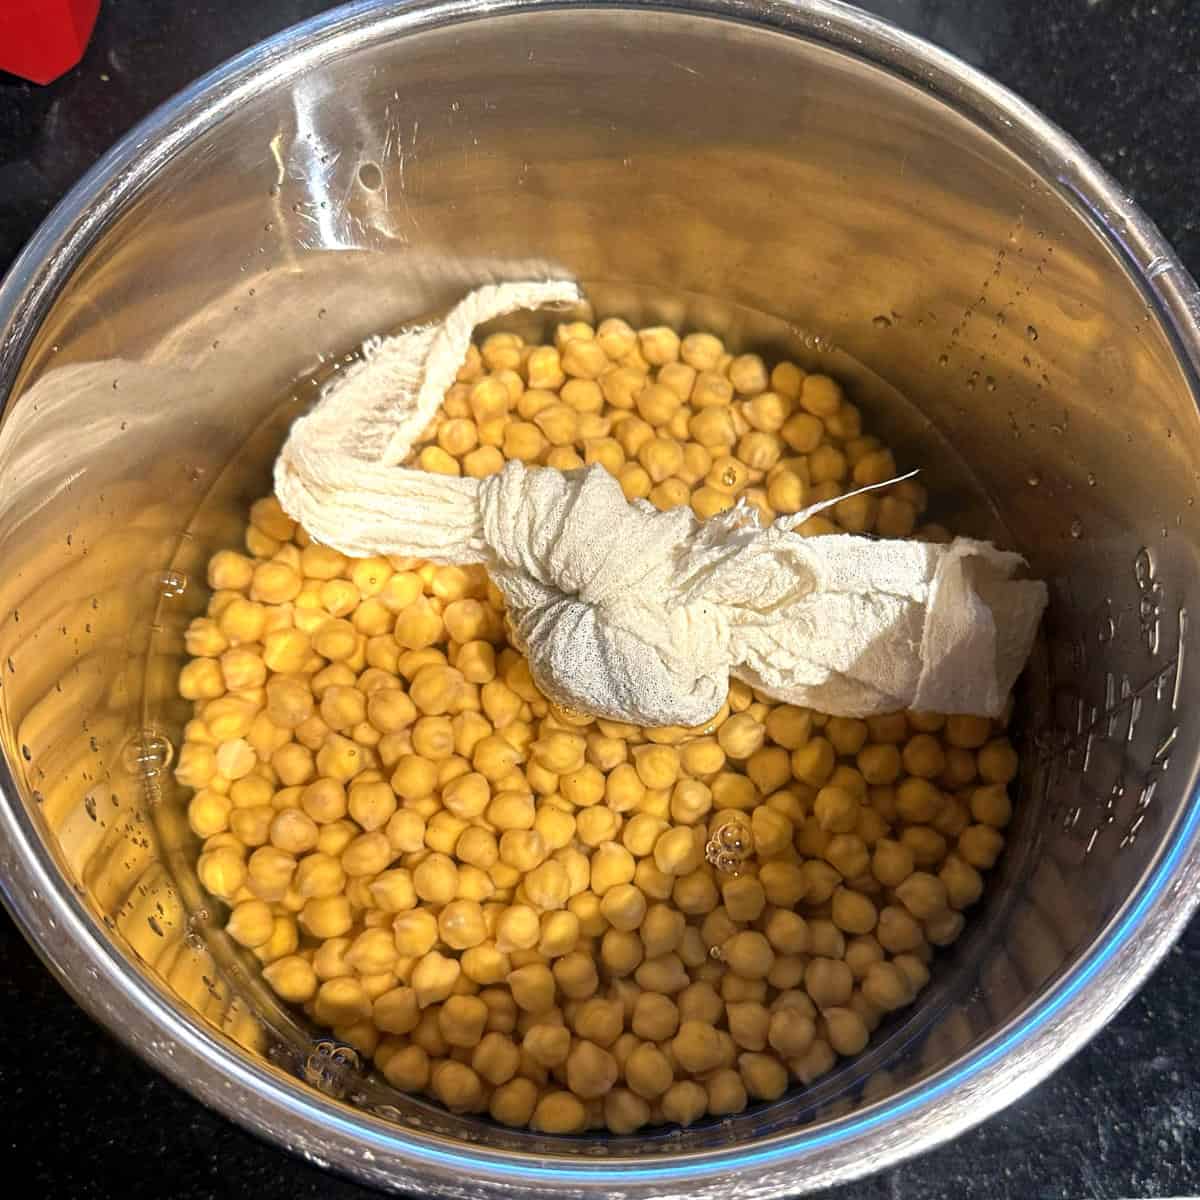 Chickpeas in Instant Pot liner with spice and tea leaves bundle.